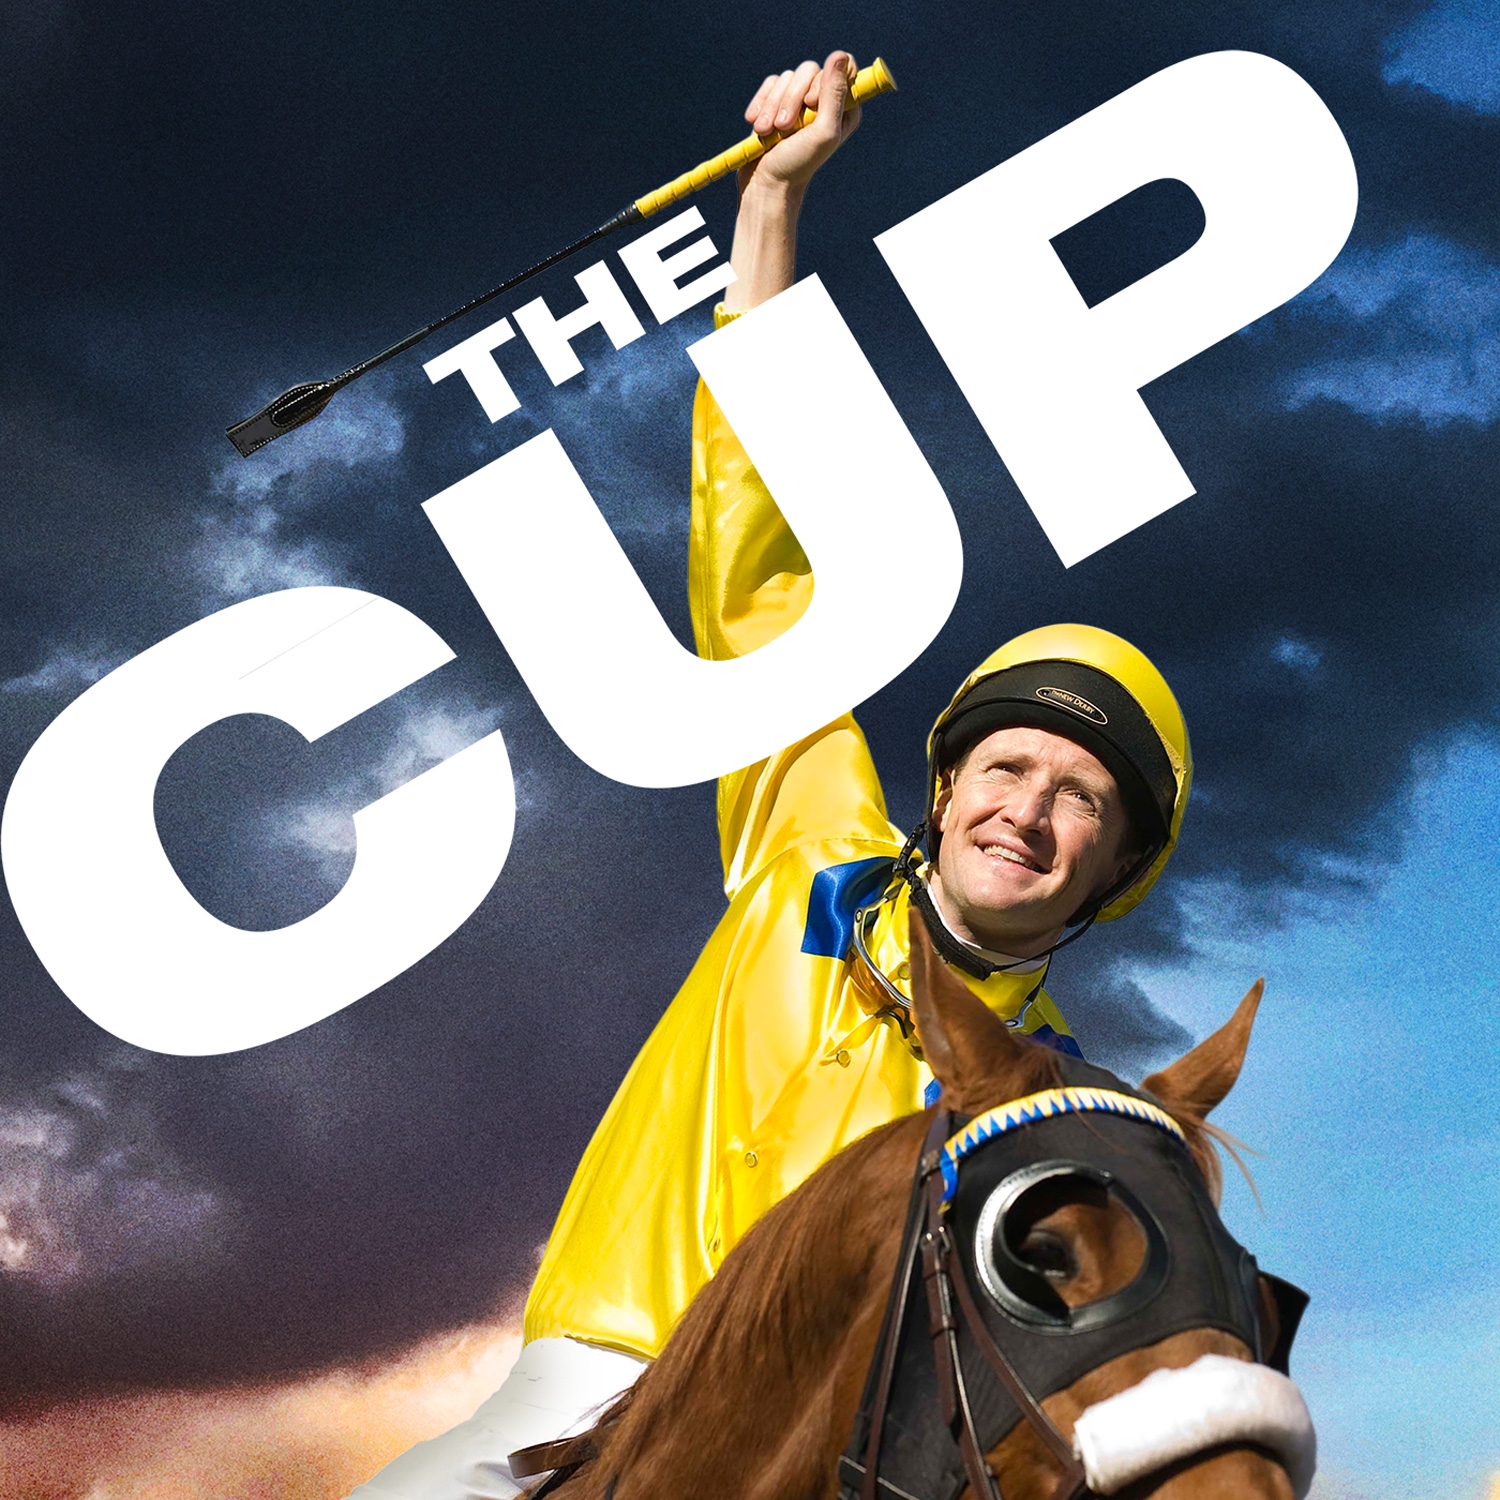 Stream The Cup Online, Download and Watch HD Movies